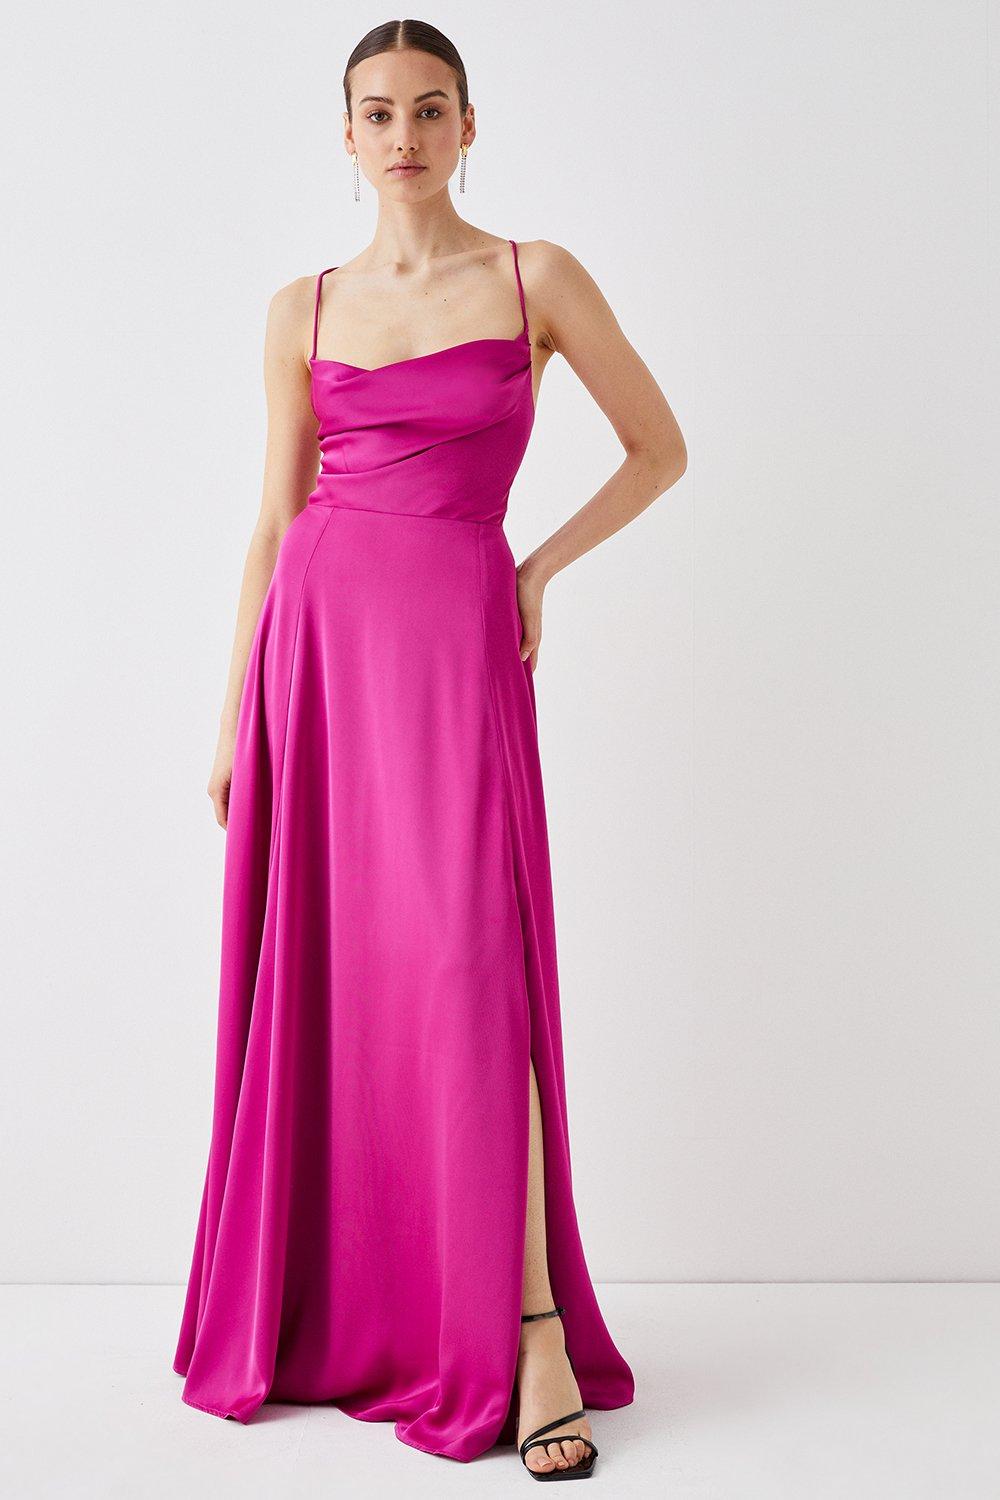 Dresses | Cowl Neck Satin Maxi Prom Dress With Strappy Back | Coast